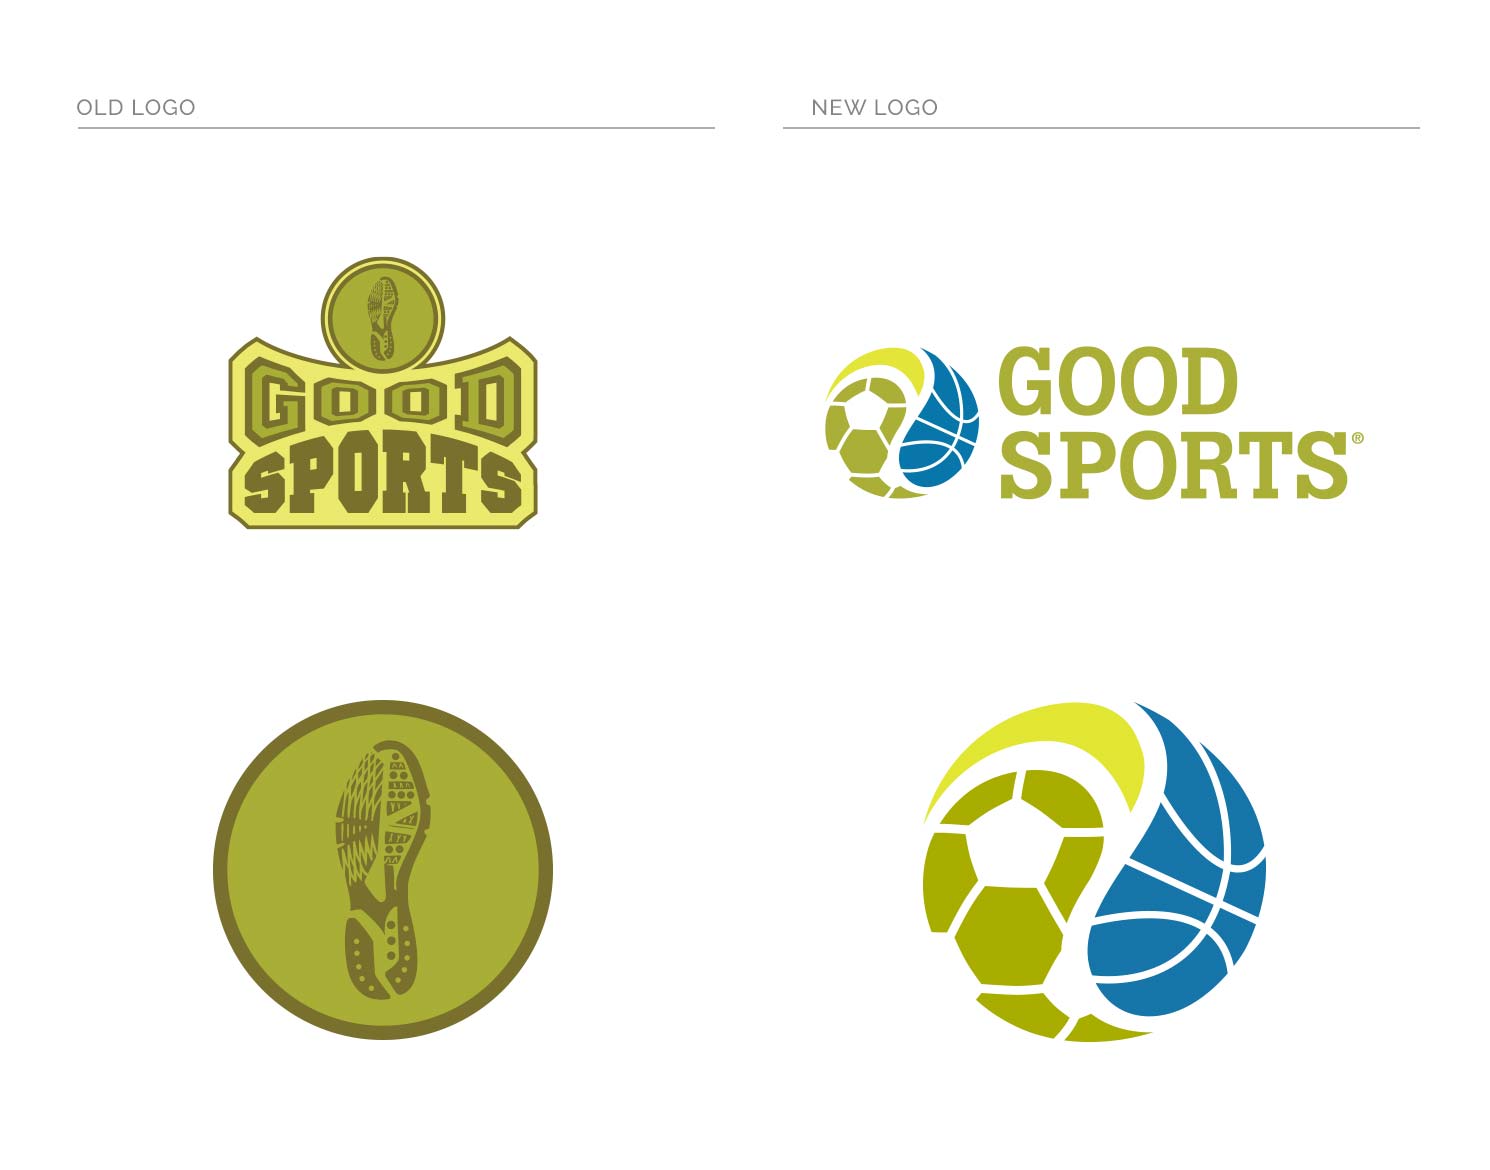 Good Sports logo before and after redesign